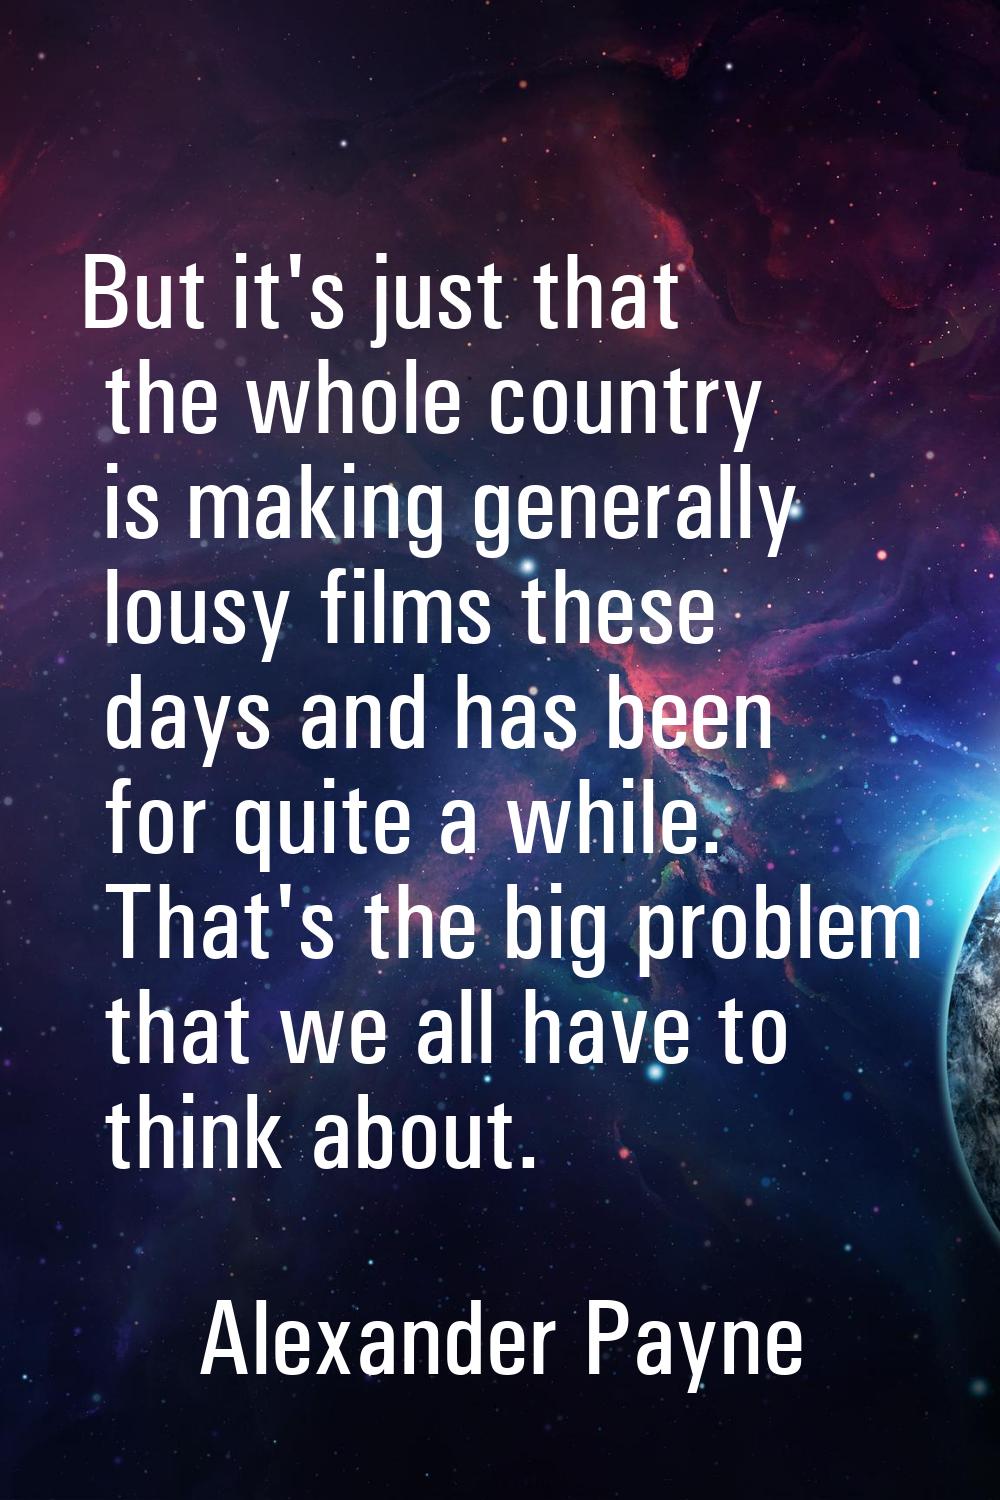 But it's just that the whole country is making generally lousy films these days and has been for qu